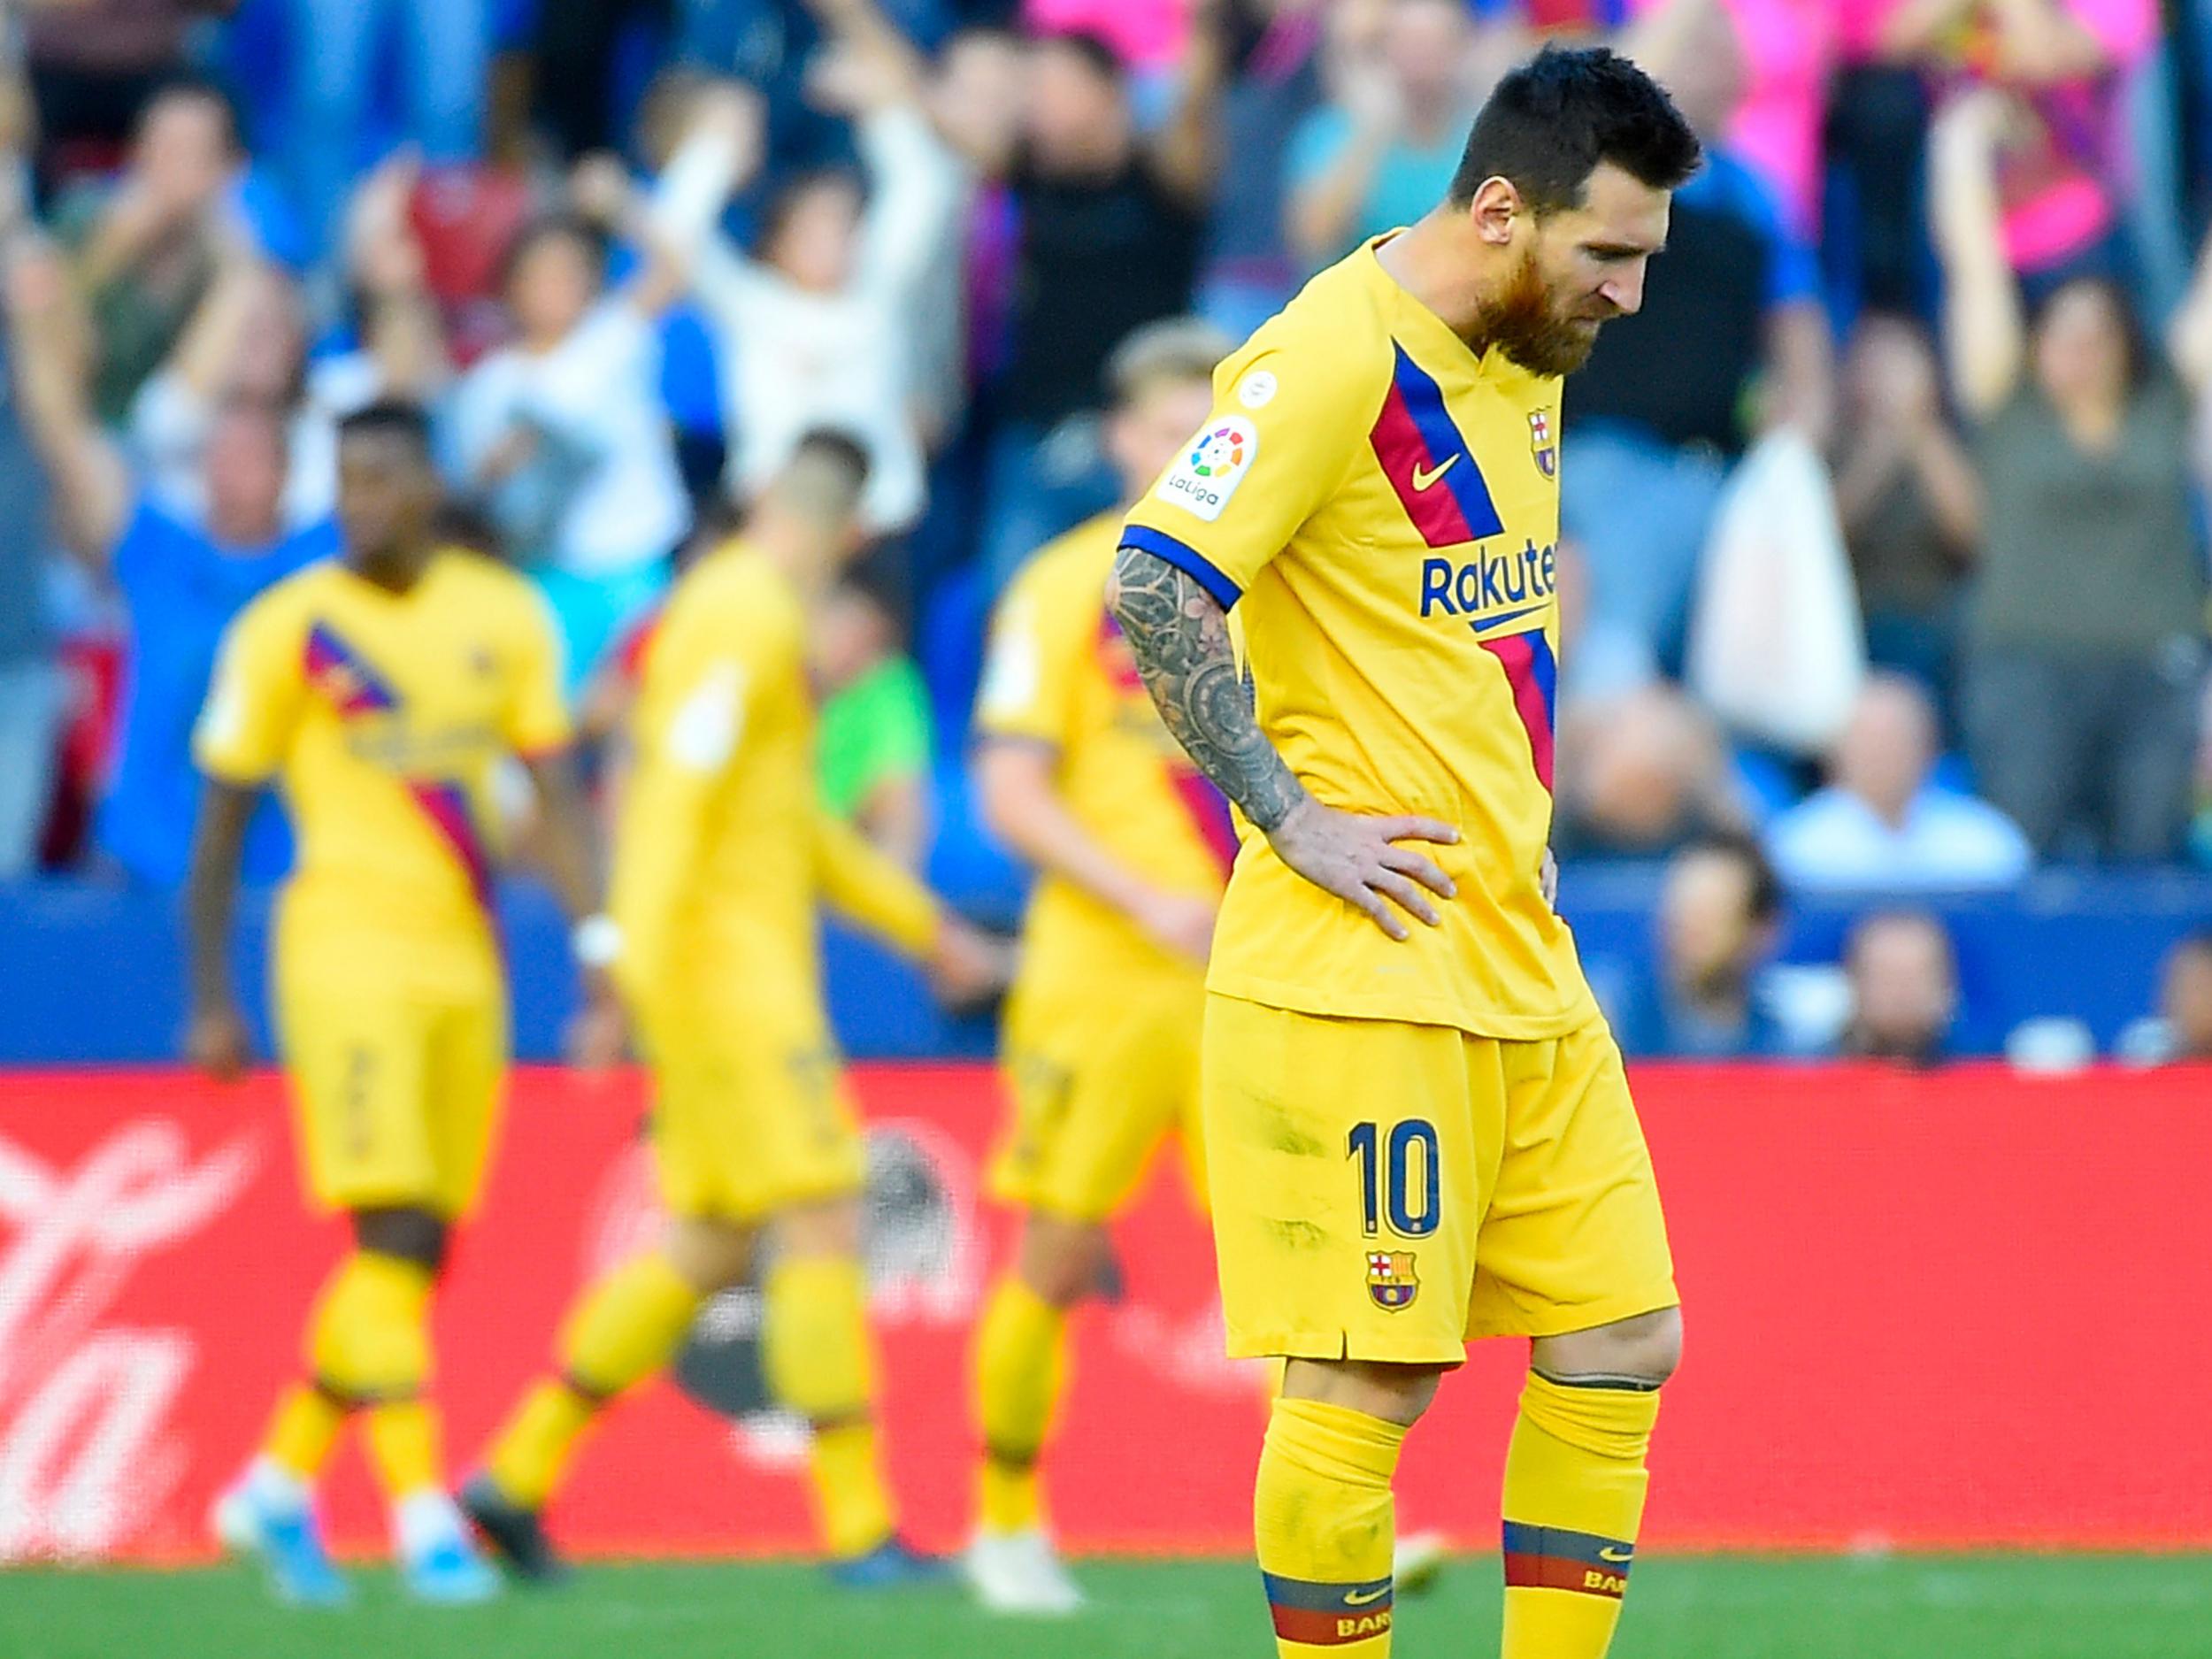 Barcelona stumbled to a 3-1 defeat at Levante